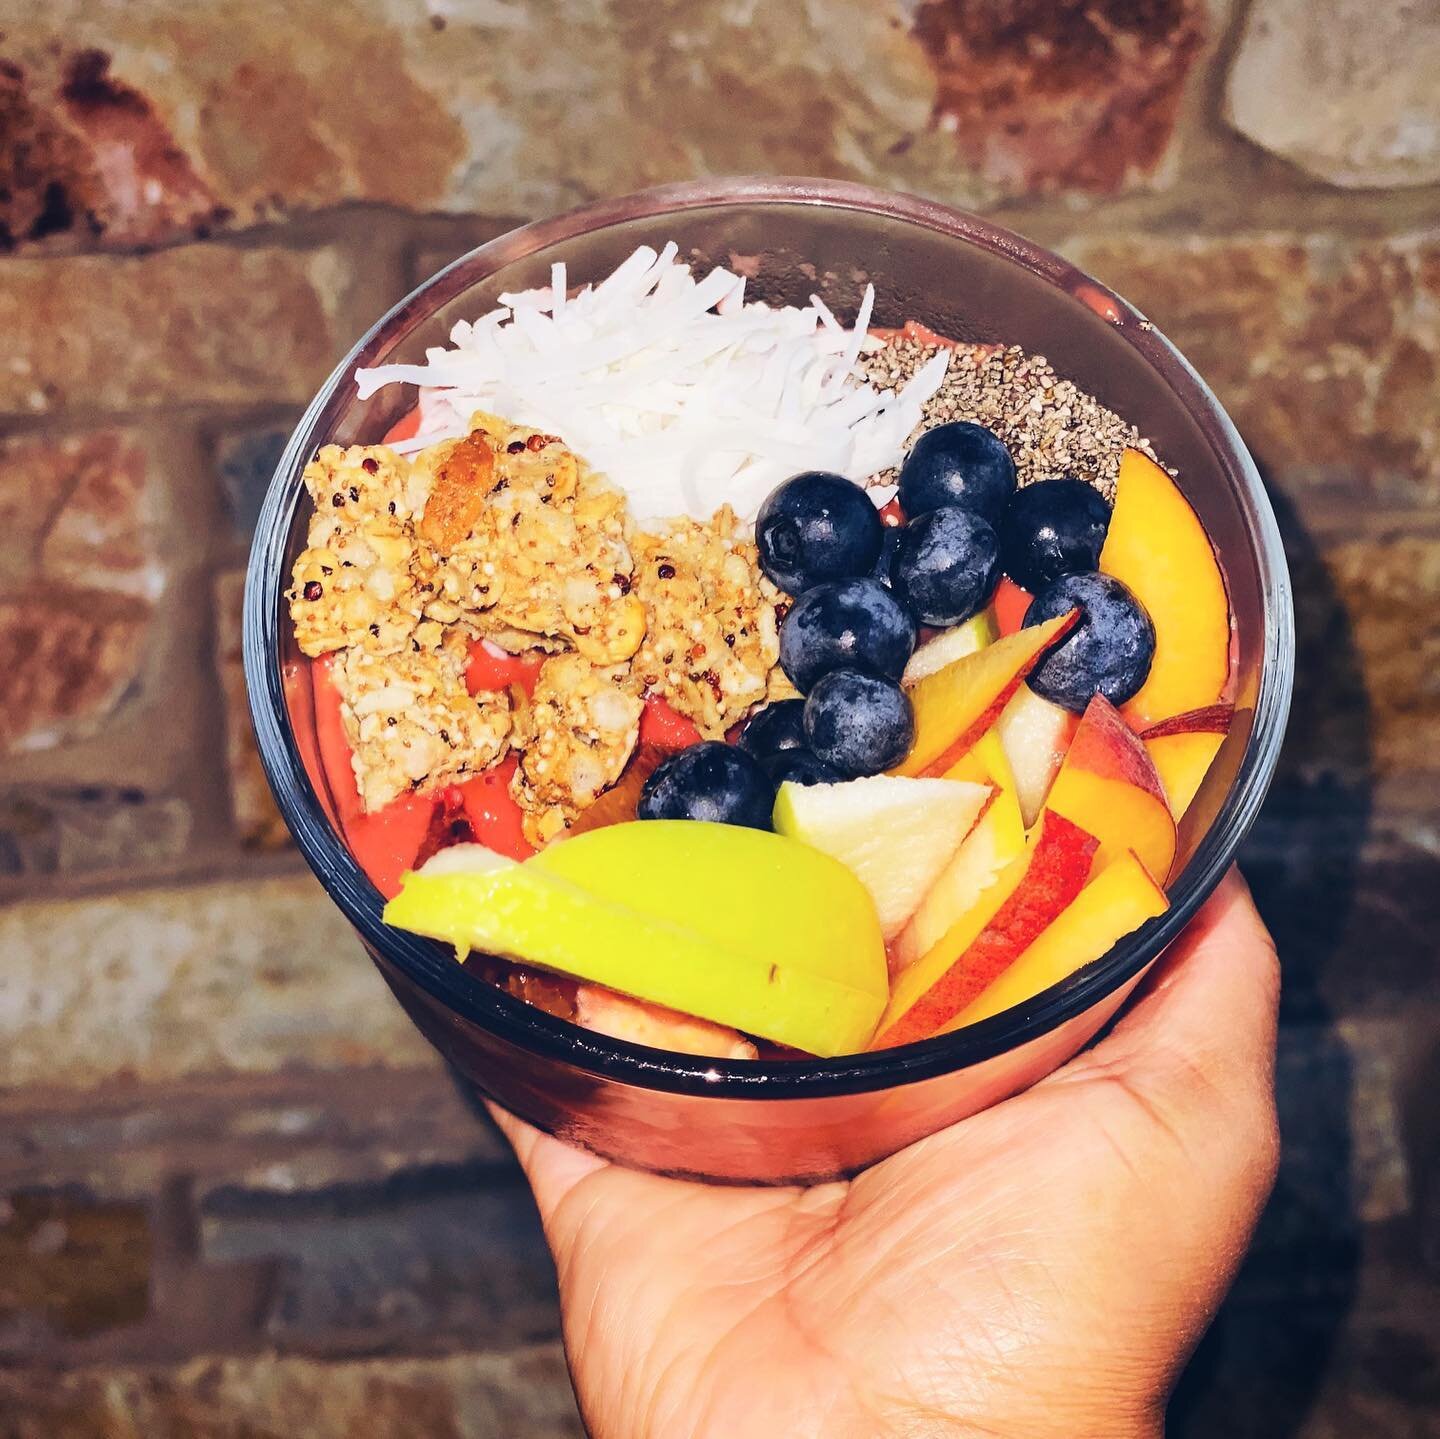 Lately, I&rsquo;ve been so obsessed with making smoothie bowls!!! This smoothie was so delicious I have to share the recipe with you all. 

Smoothie :
- Mango 
- Avocado 
- Raspberries 
- Yogurt 
- Beet juice 

Toppings :
- Blood orange 
- Peaches
- 